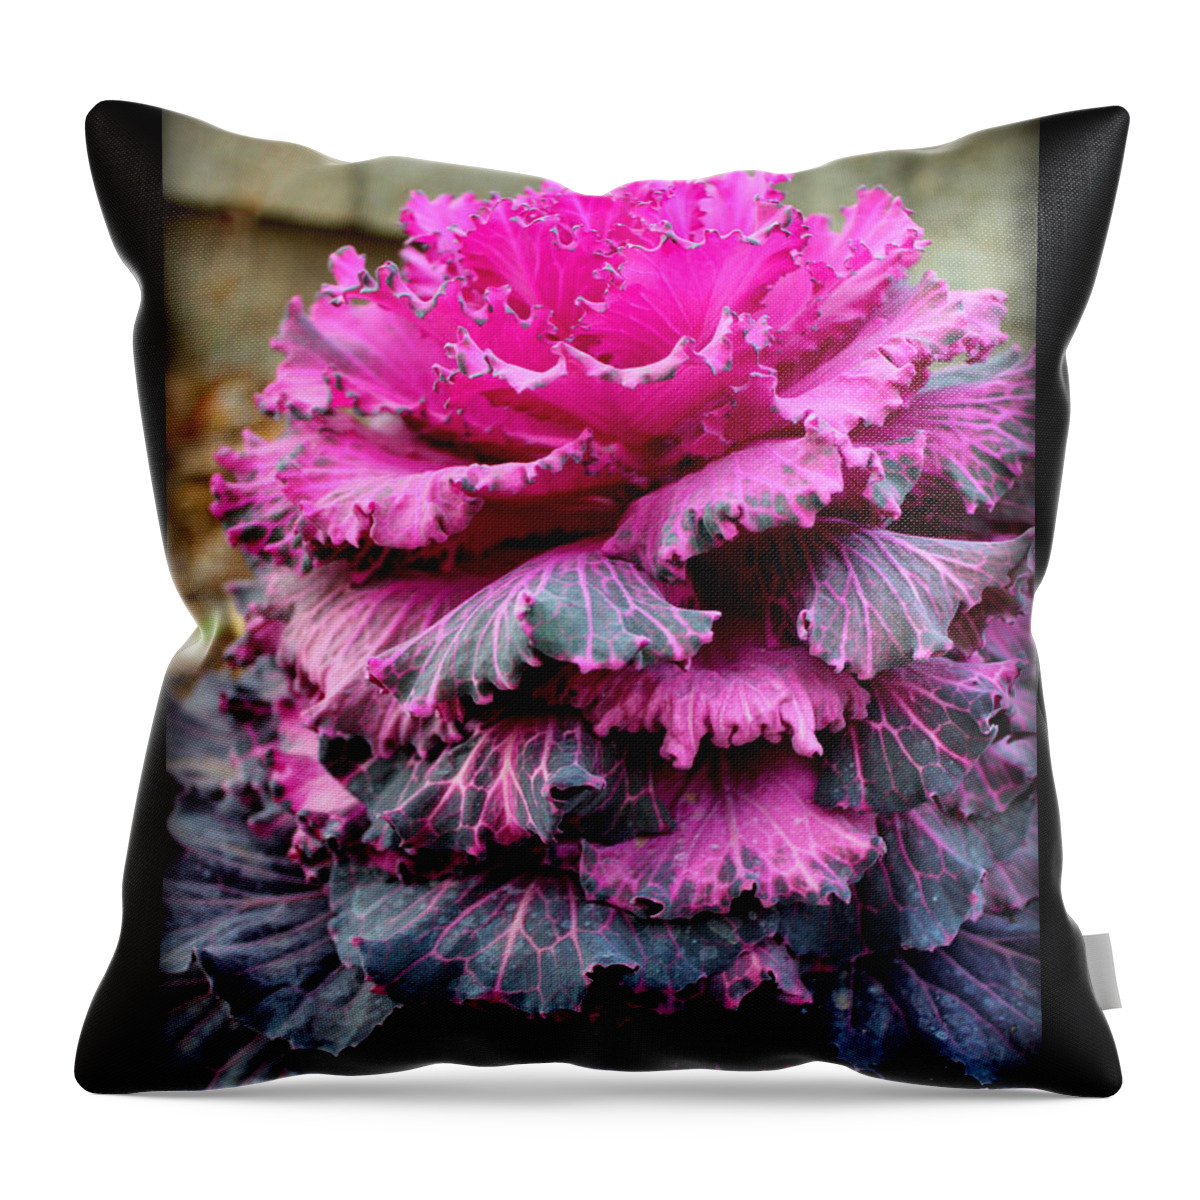 Dynasty Series Flowers Throw Pillow featuring the photograph Dynasty Red Flowering Cabbage by Kathy White